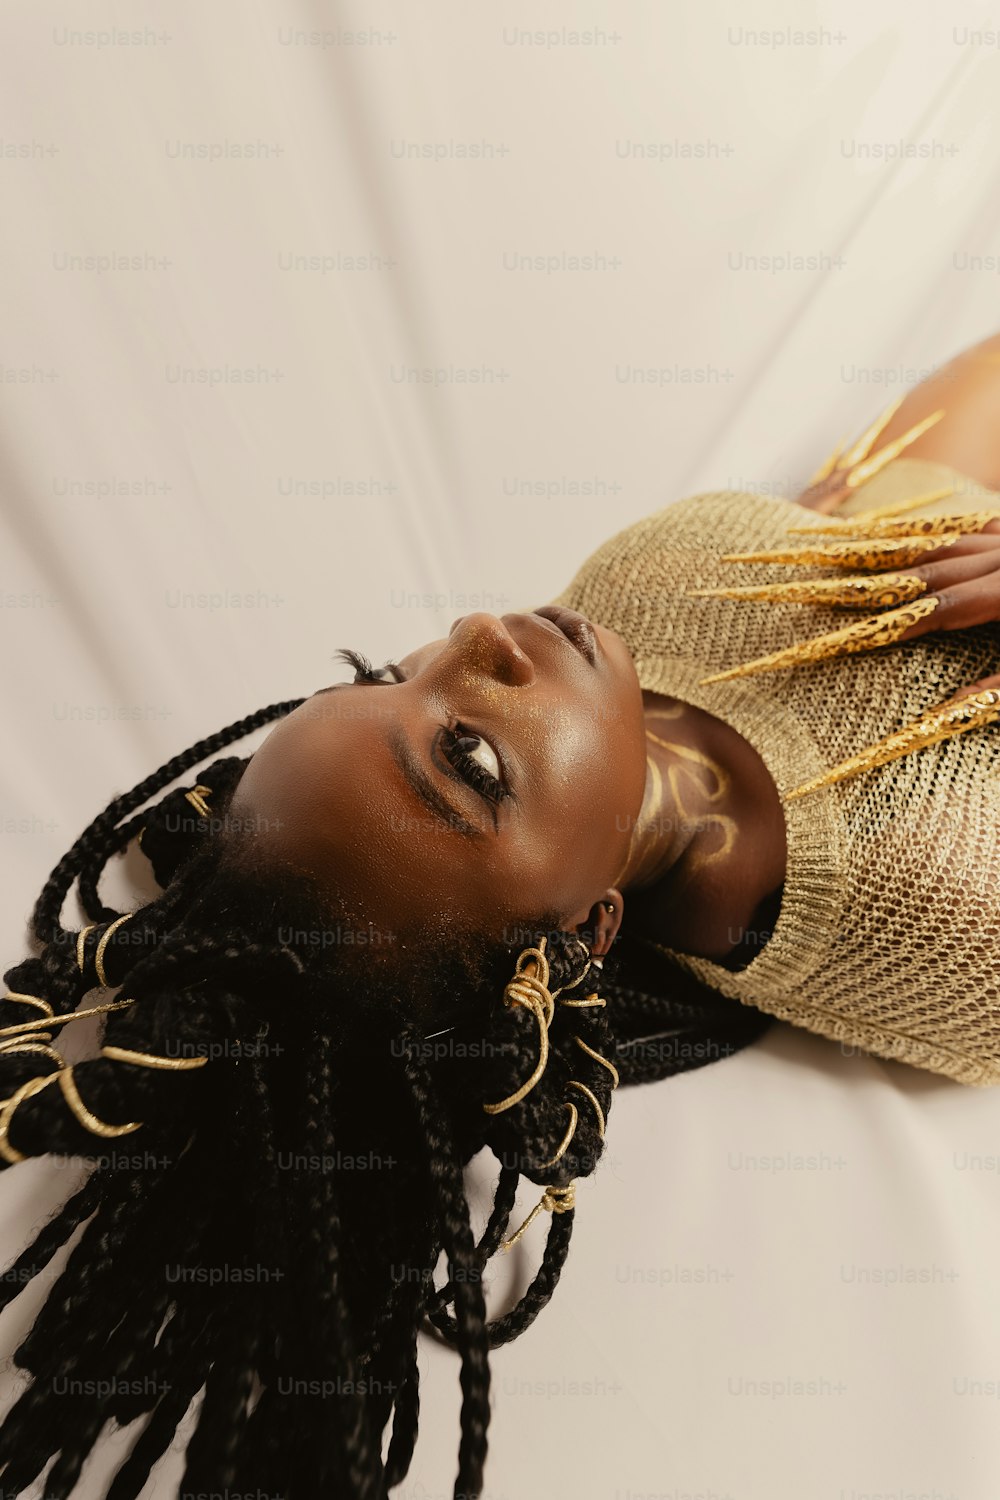 a woman with dreadlocks and a gold dress